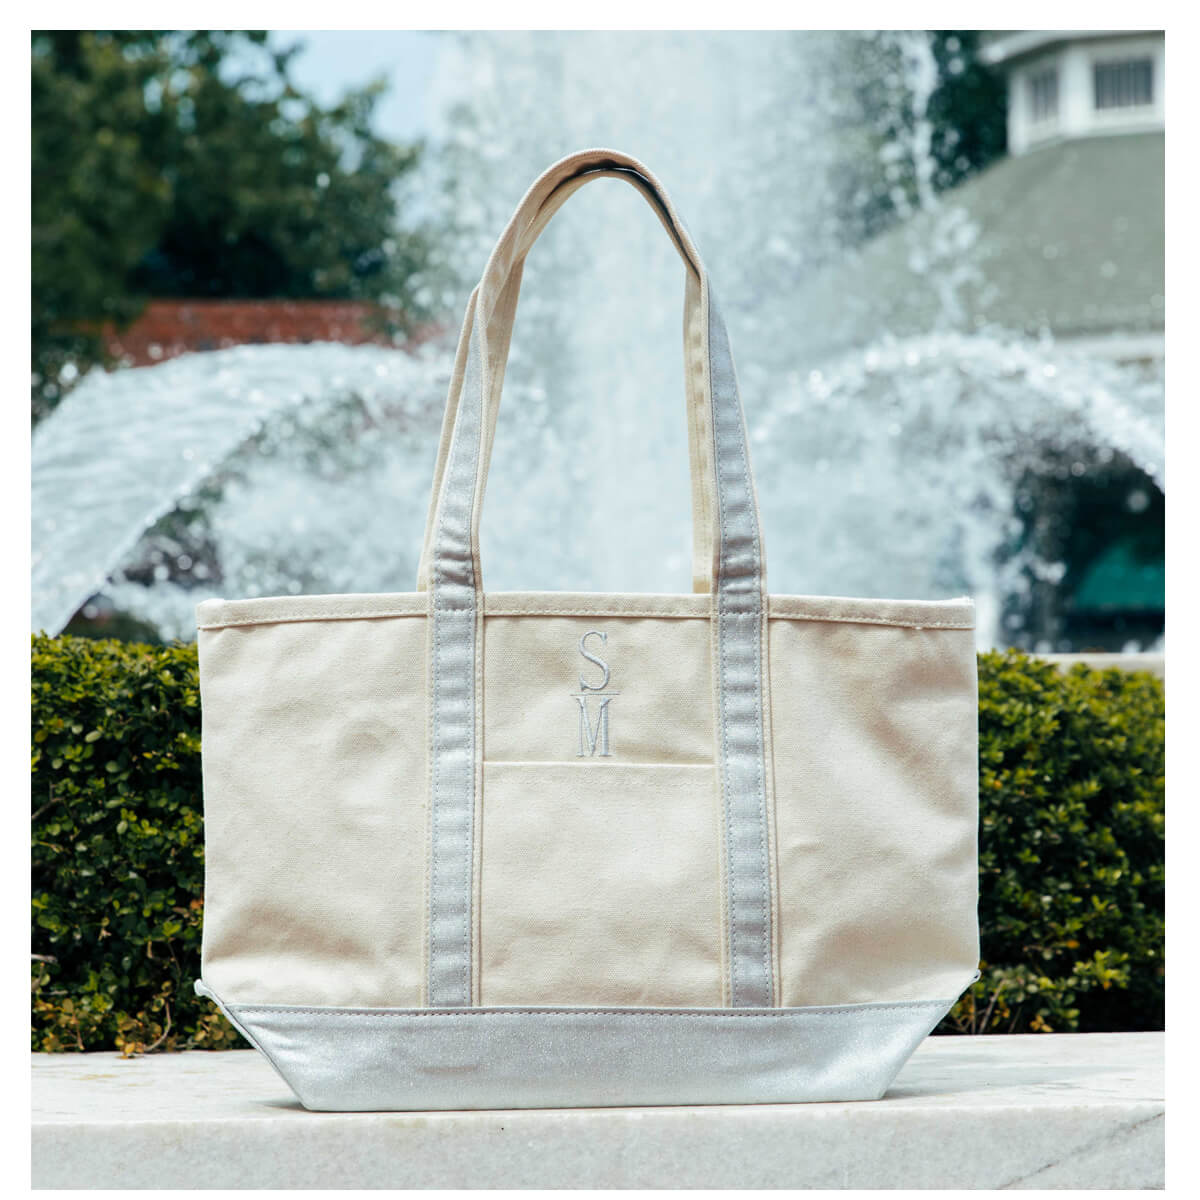 Personalized Metallic Trimmed Tote Bag